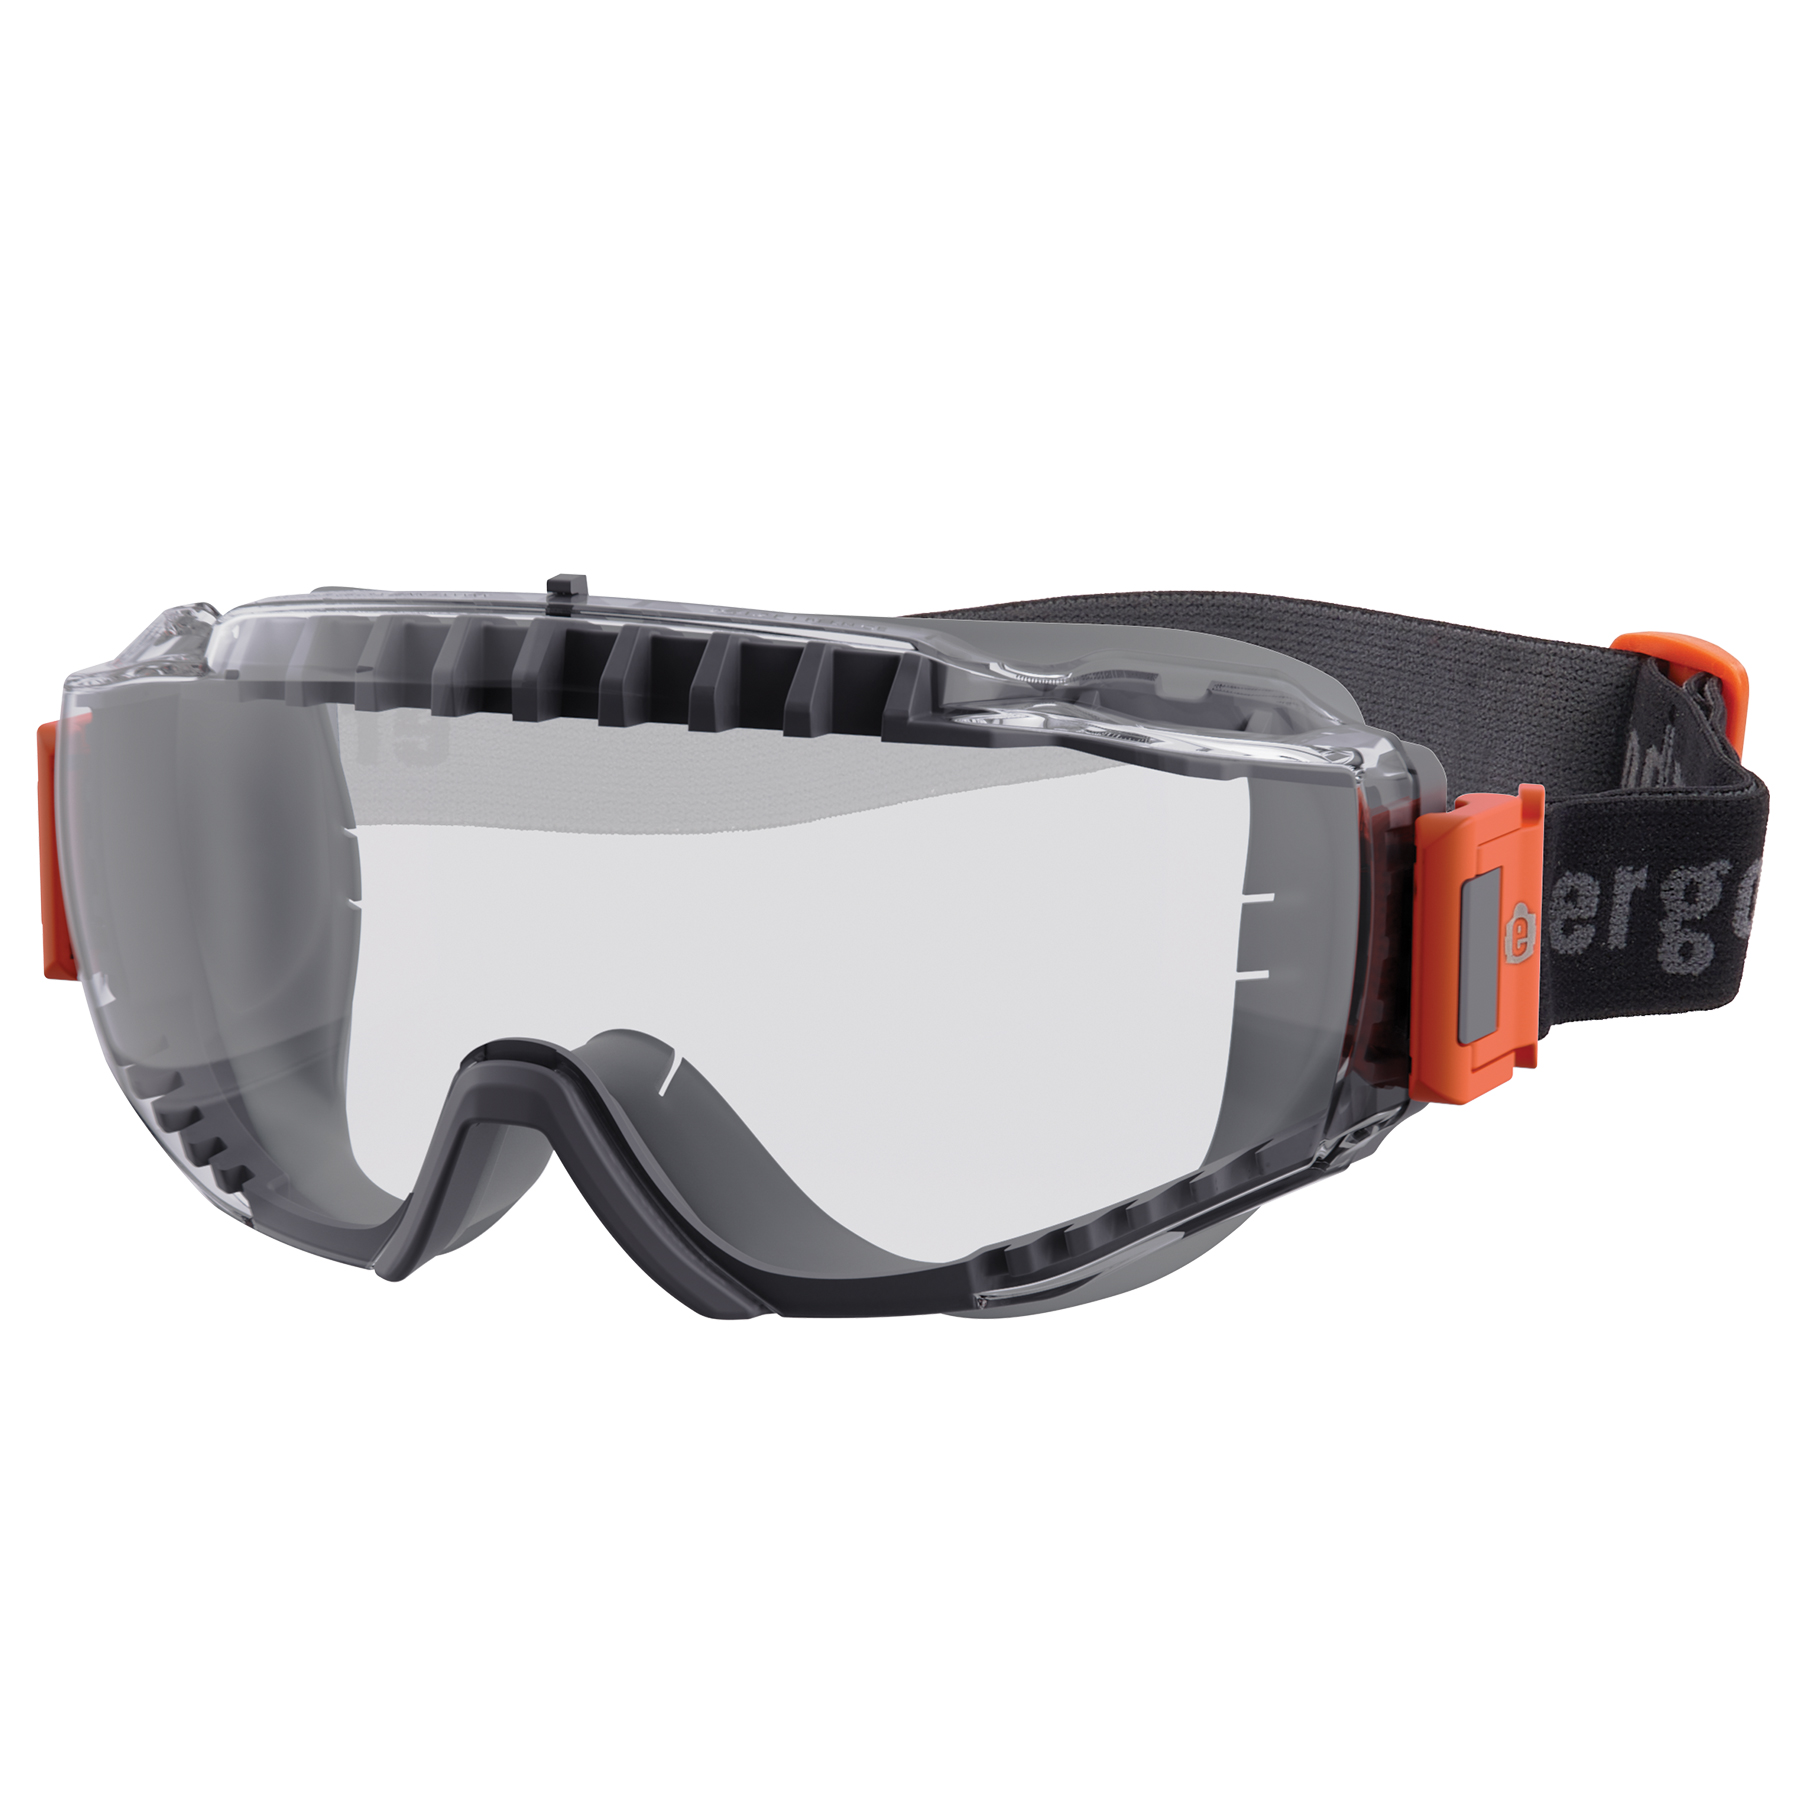 https://www.ergodyne.com/sites/default/files/product-images/modi-otg-anti-scratch-and-anti-fog-safety-goggles-with-elastic-strap-gray-front_0.jpg